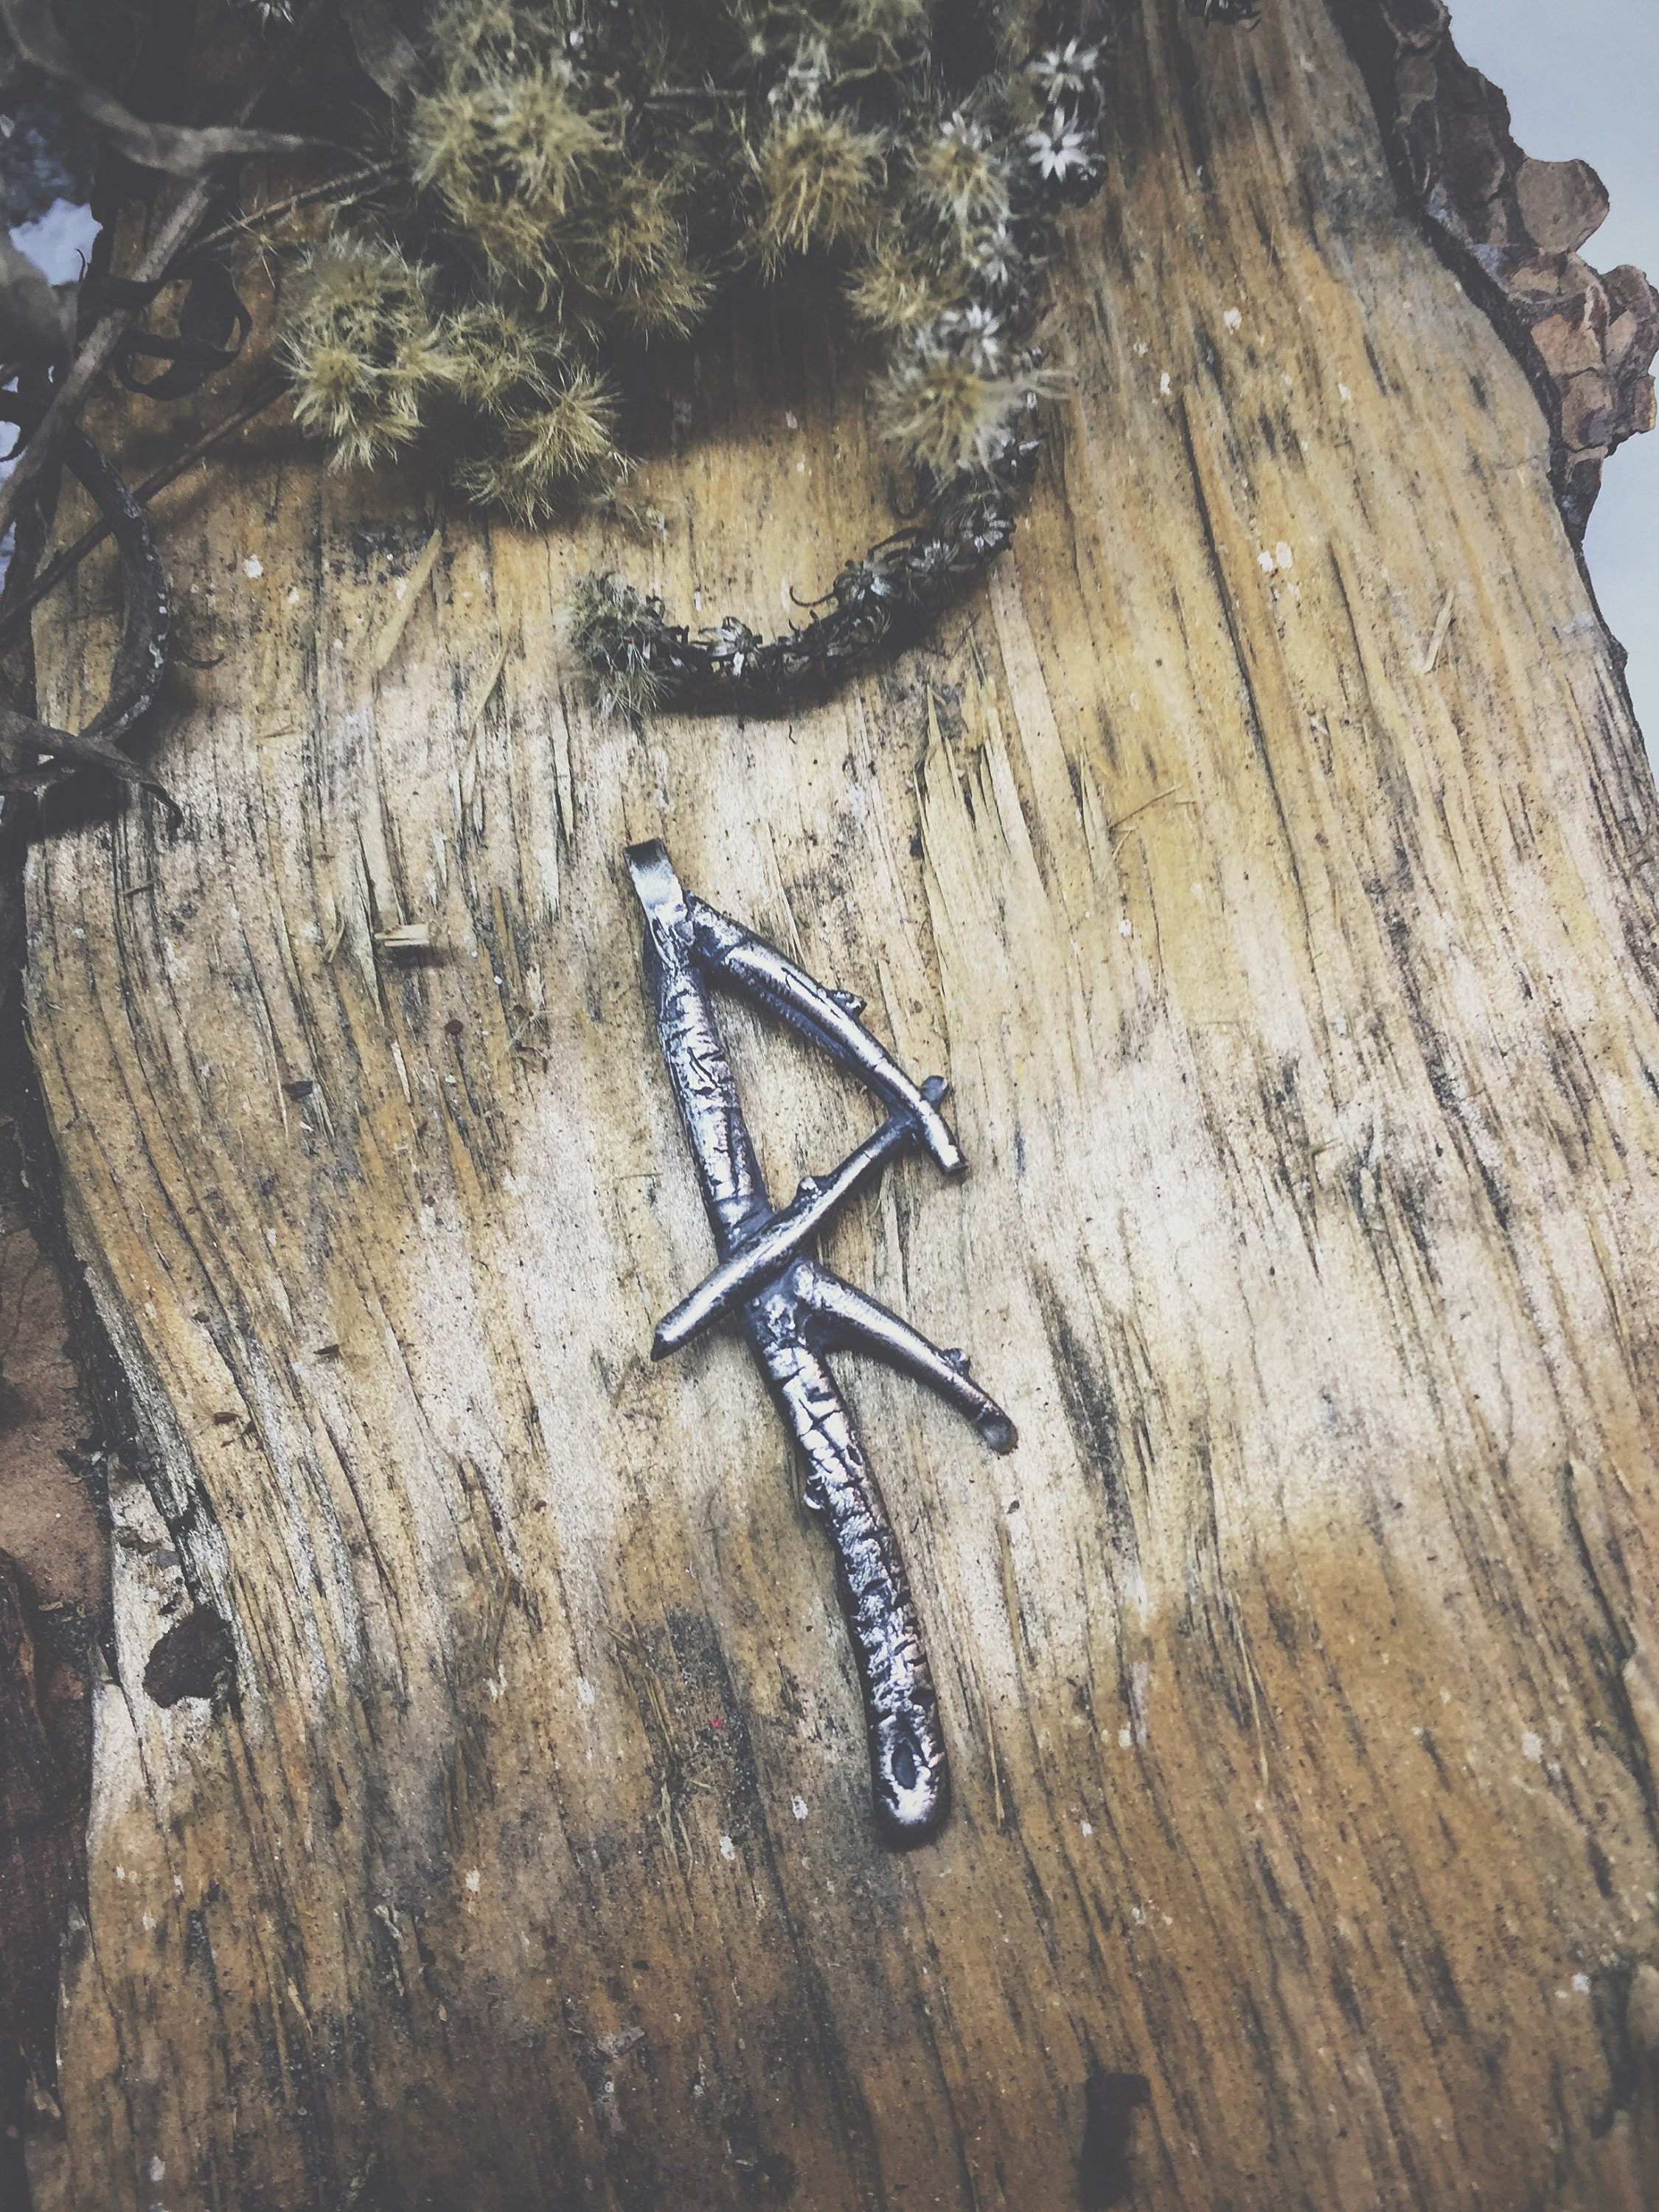 HAND CARVED Sterling Silver RAIDHO Rune Pendant, Necklace Oxidized Silver  Darkwood, Viking, Norse, Nature, Occult, Esoteric, Protection - Etsy